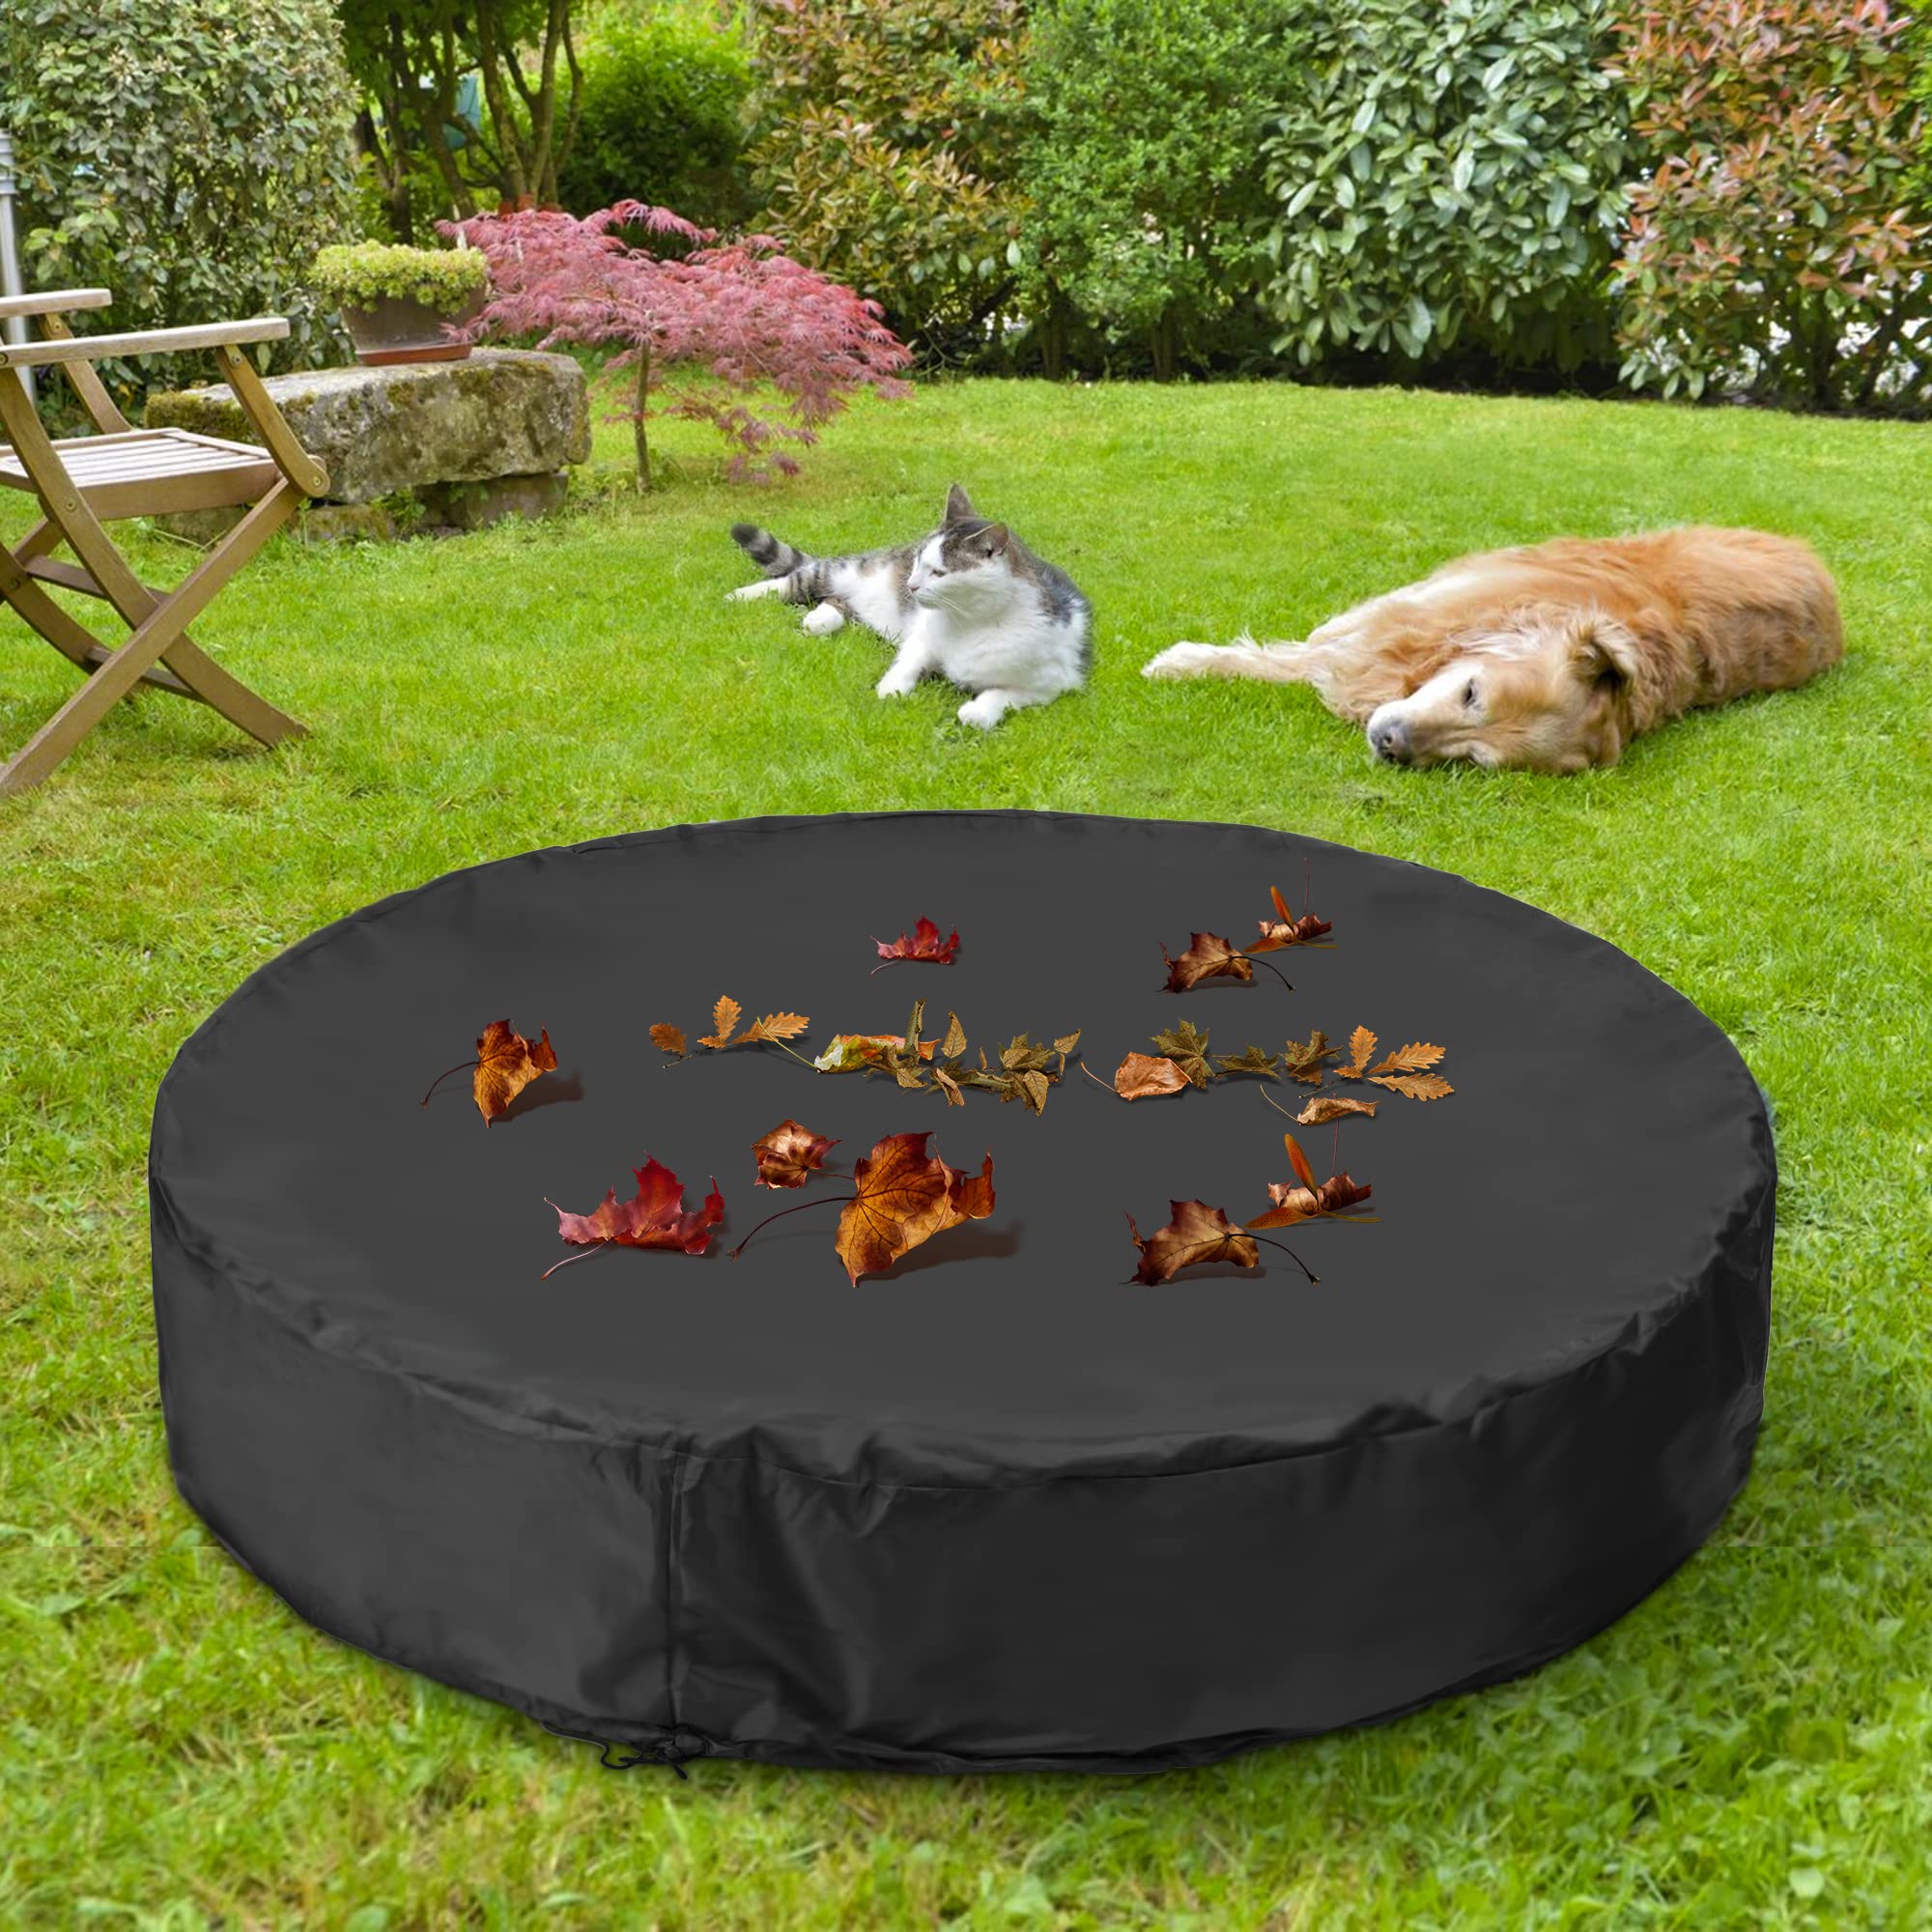 Niubya Round Dog Pool Cover, Foldable Pet Swimming Pool Cover, Waterproof Dustproof and Washable Pool Protective Cover with Drawstring Design